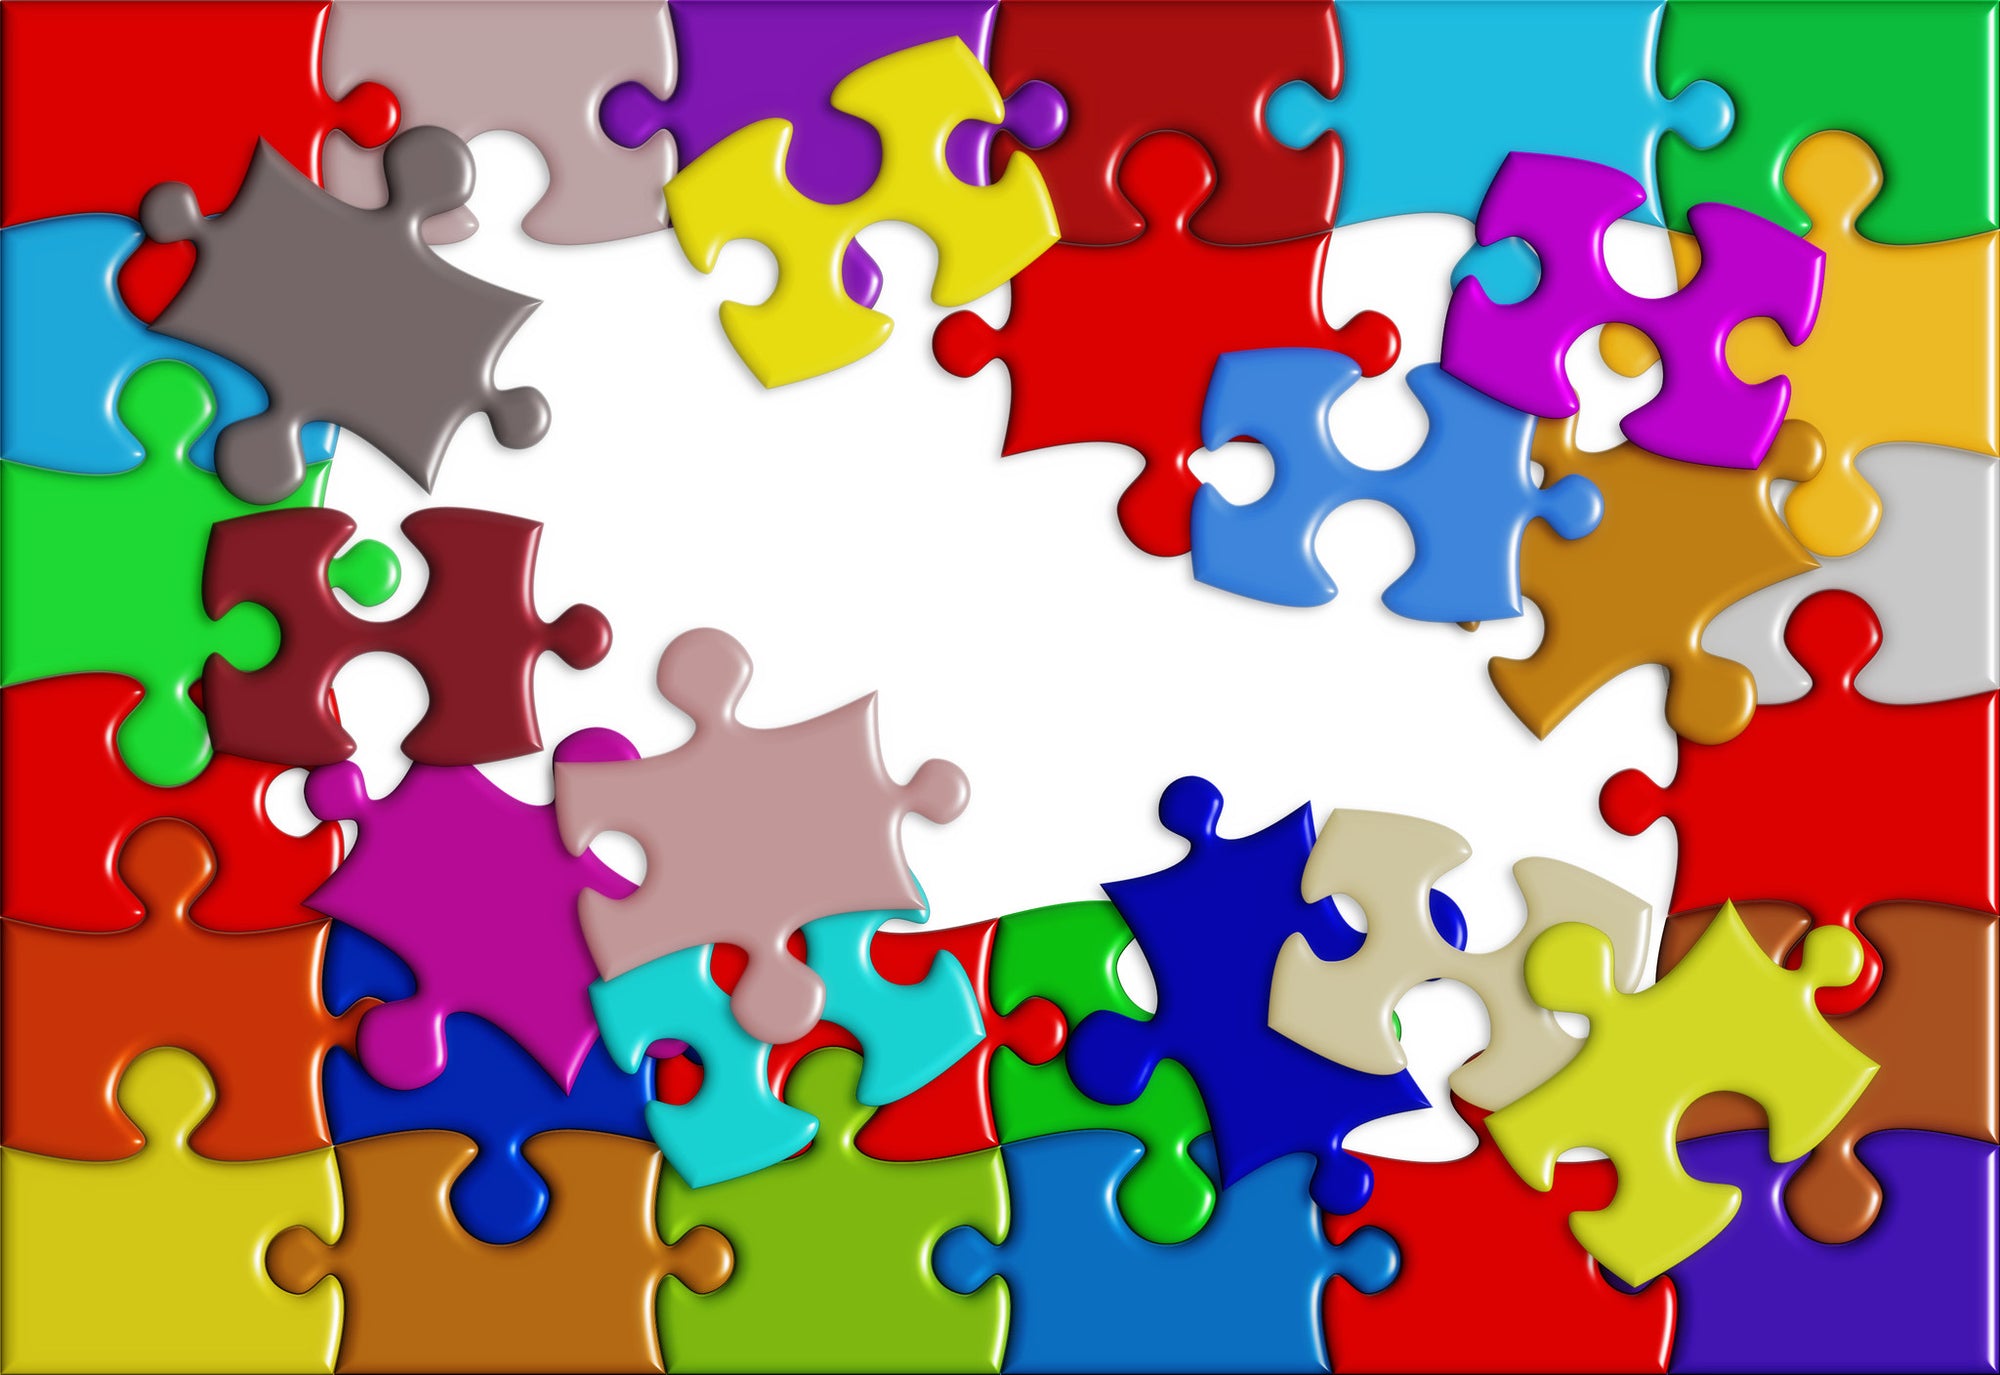 Jigsaw Puzzles...Great for Your Health